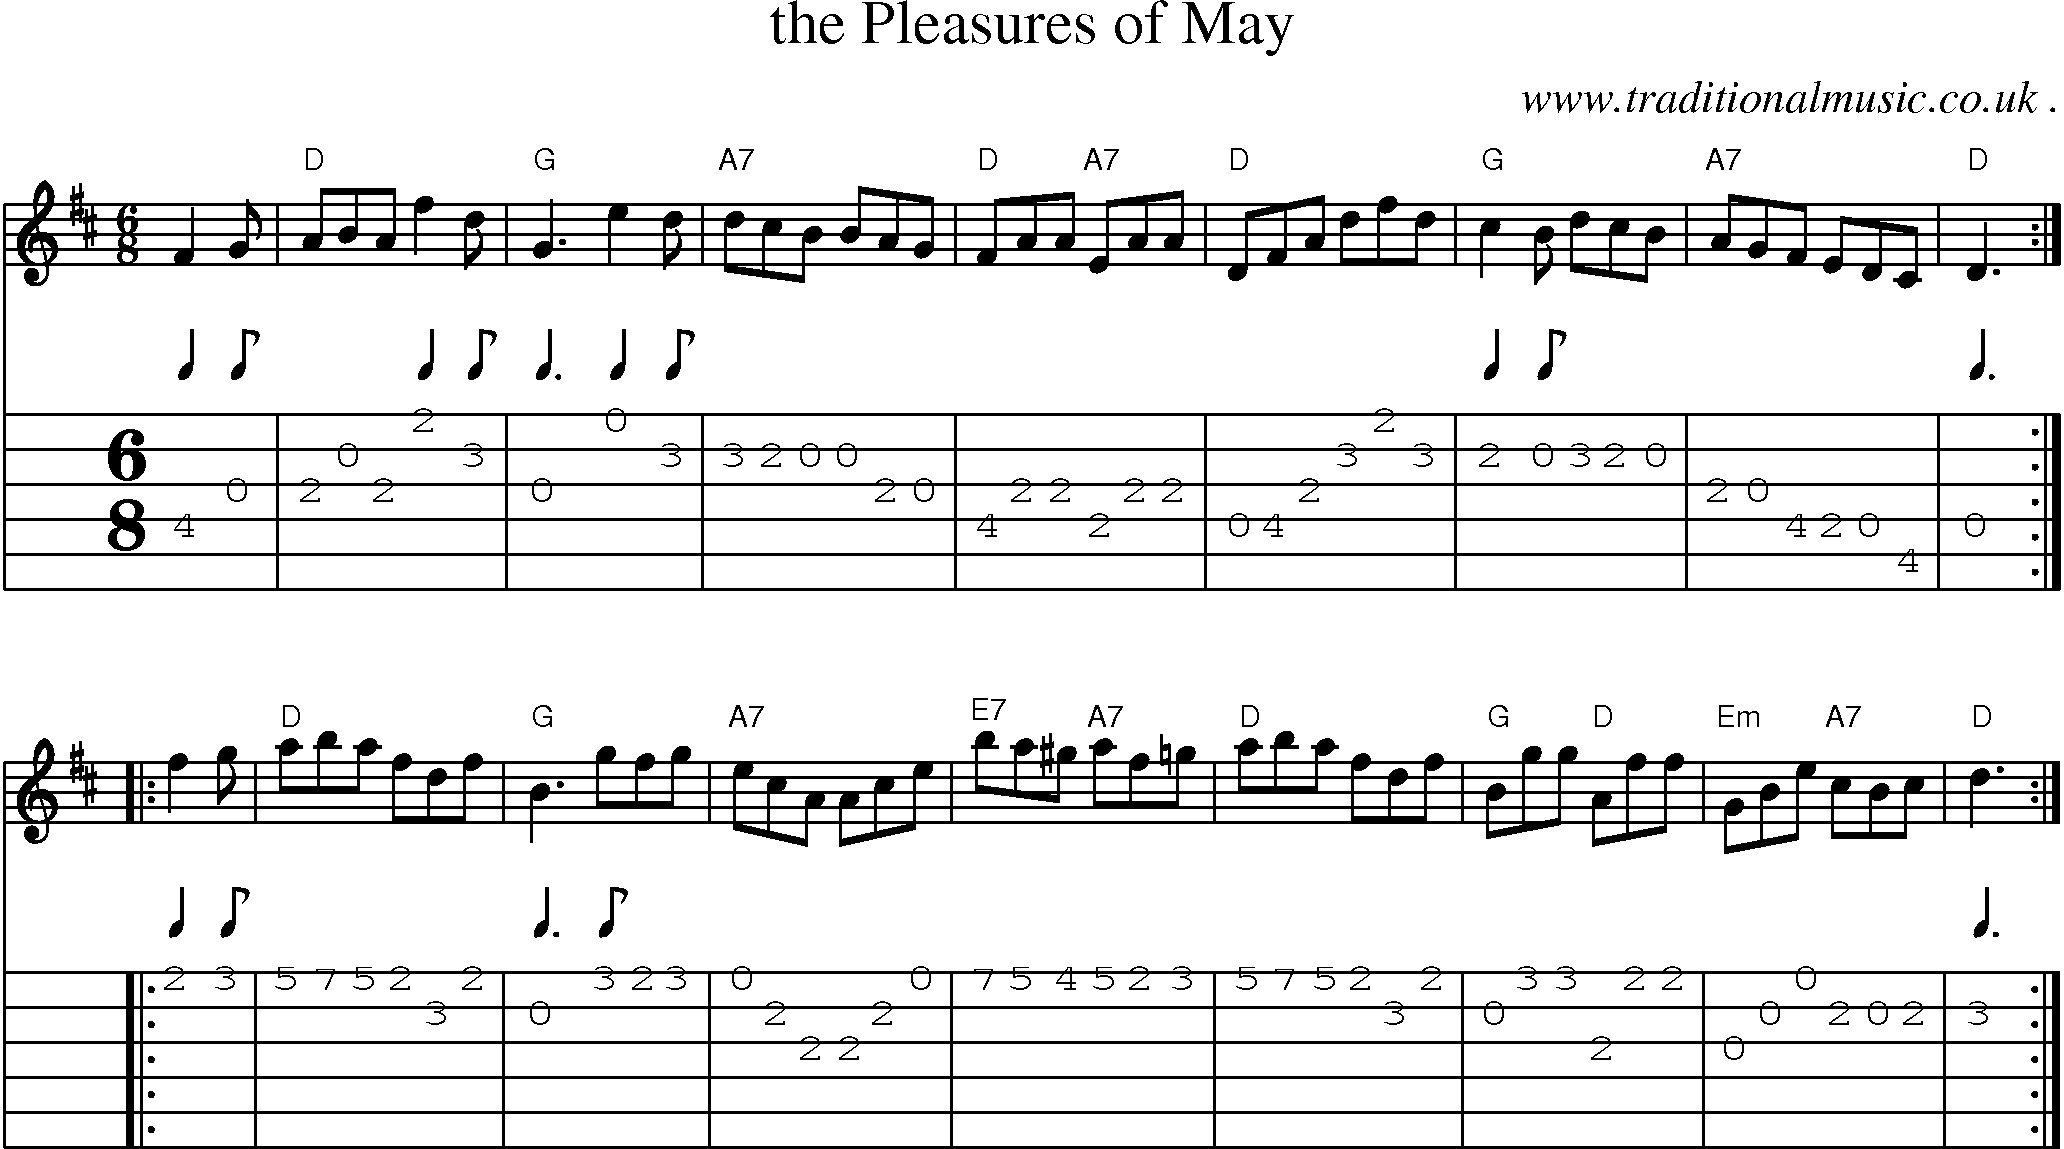 Sheet-music  score, Chords and Guitar Tabs for The Pleasures Of May